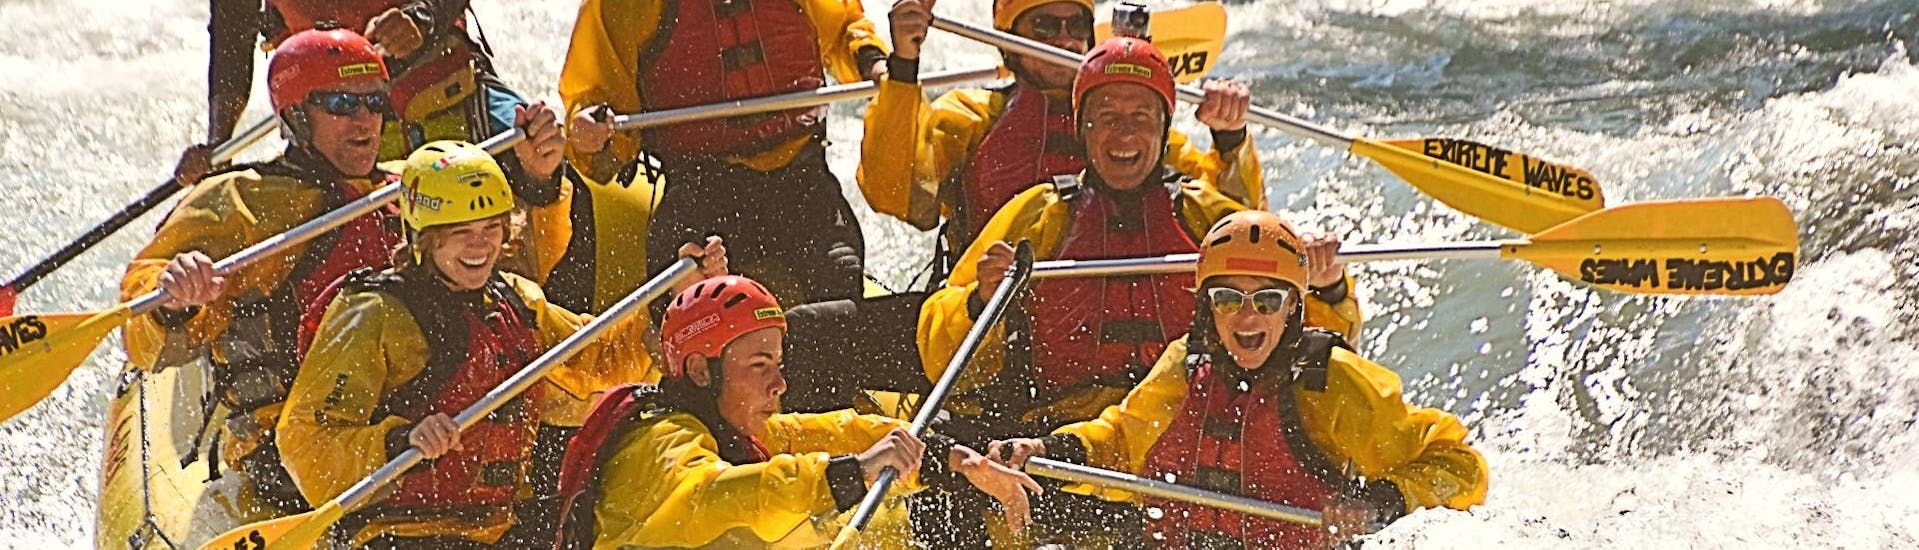 Participants are running high on adrenaline during the Rafting on the Noce River in Val di Sole with Extreme Waves.